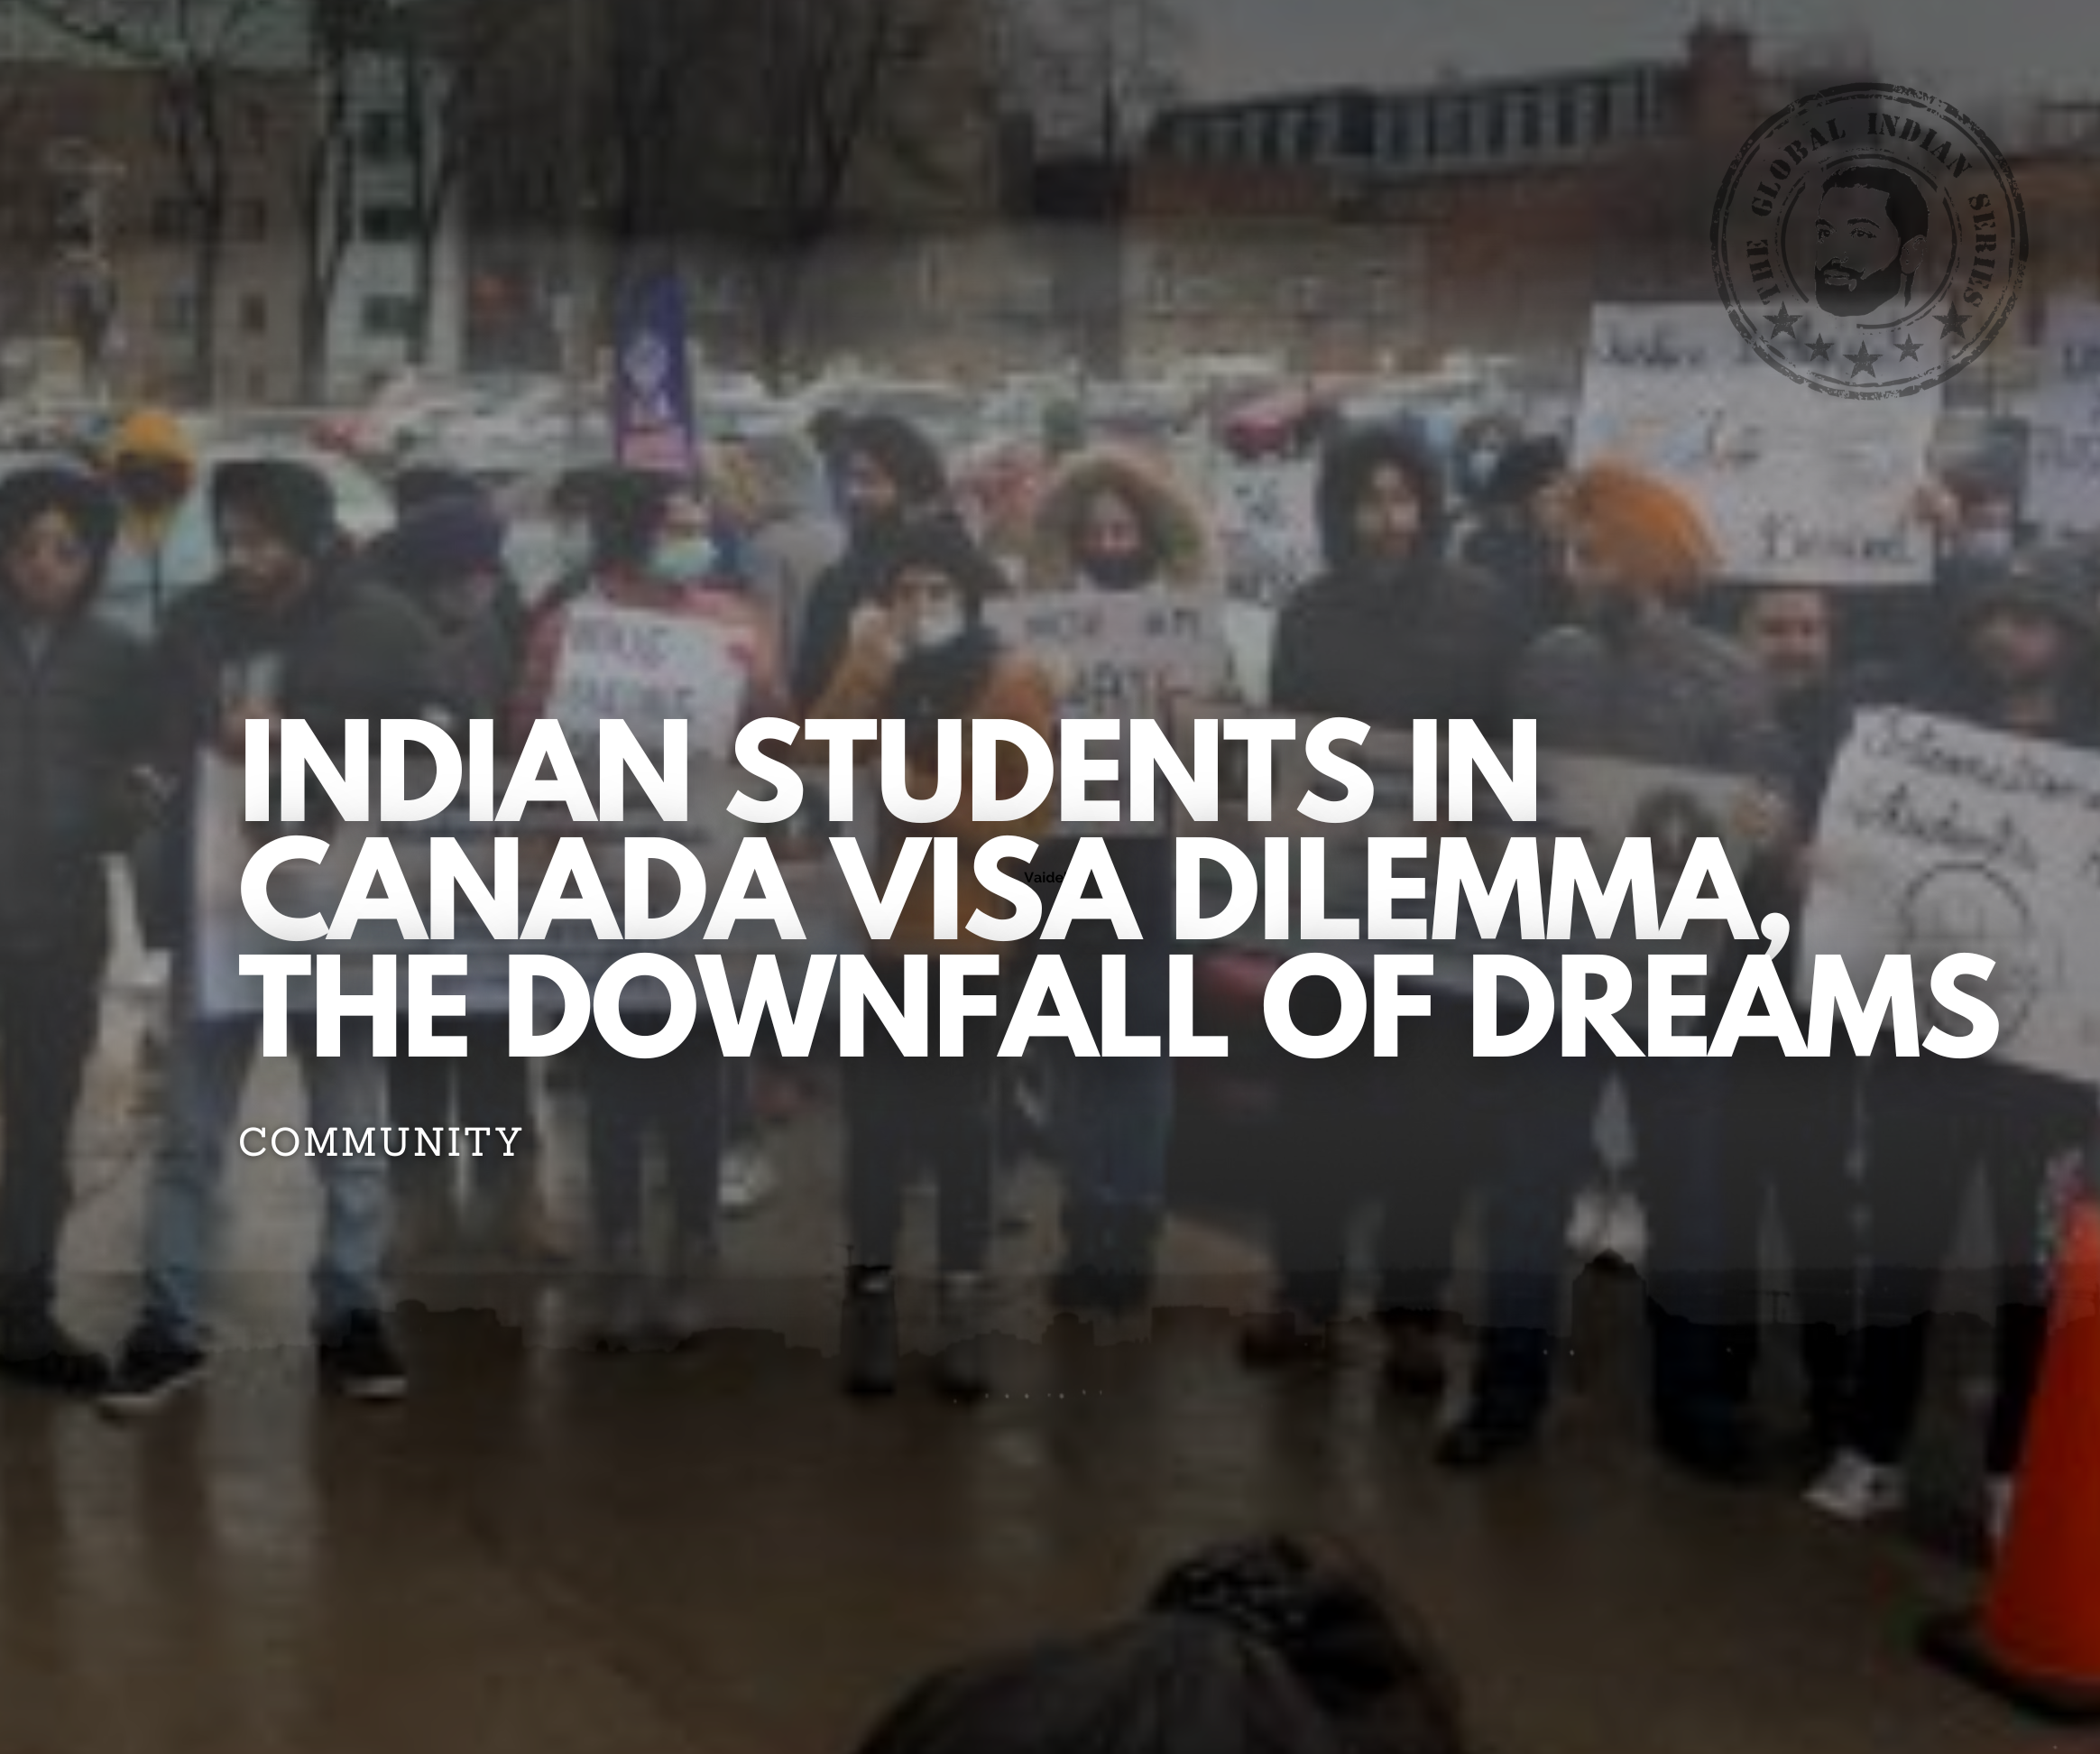 The downfall of dreams: Indian Students In Canada Visa Dilemma — plagued by the three colleges in Canada declaring bankruptcy.